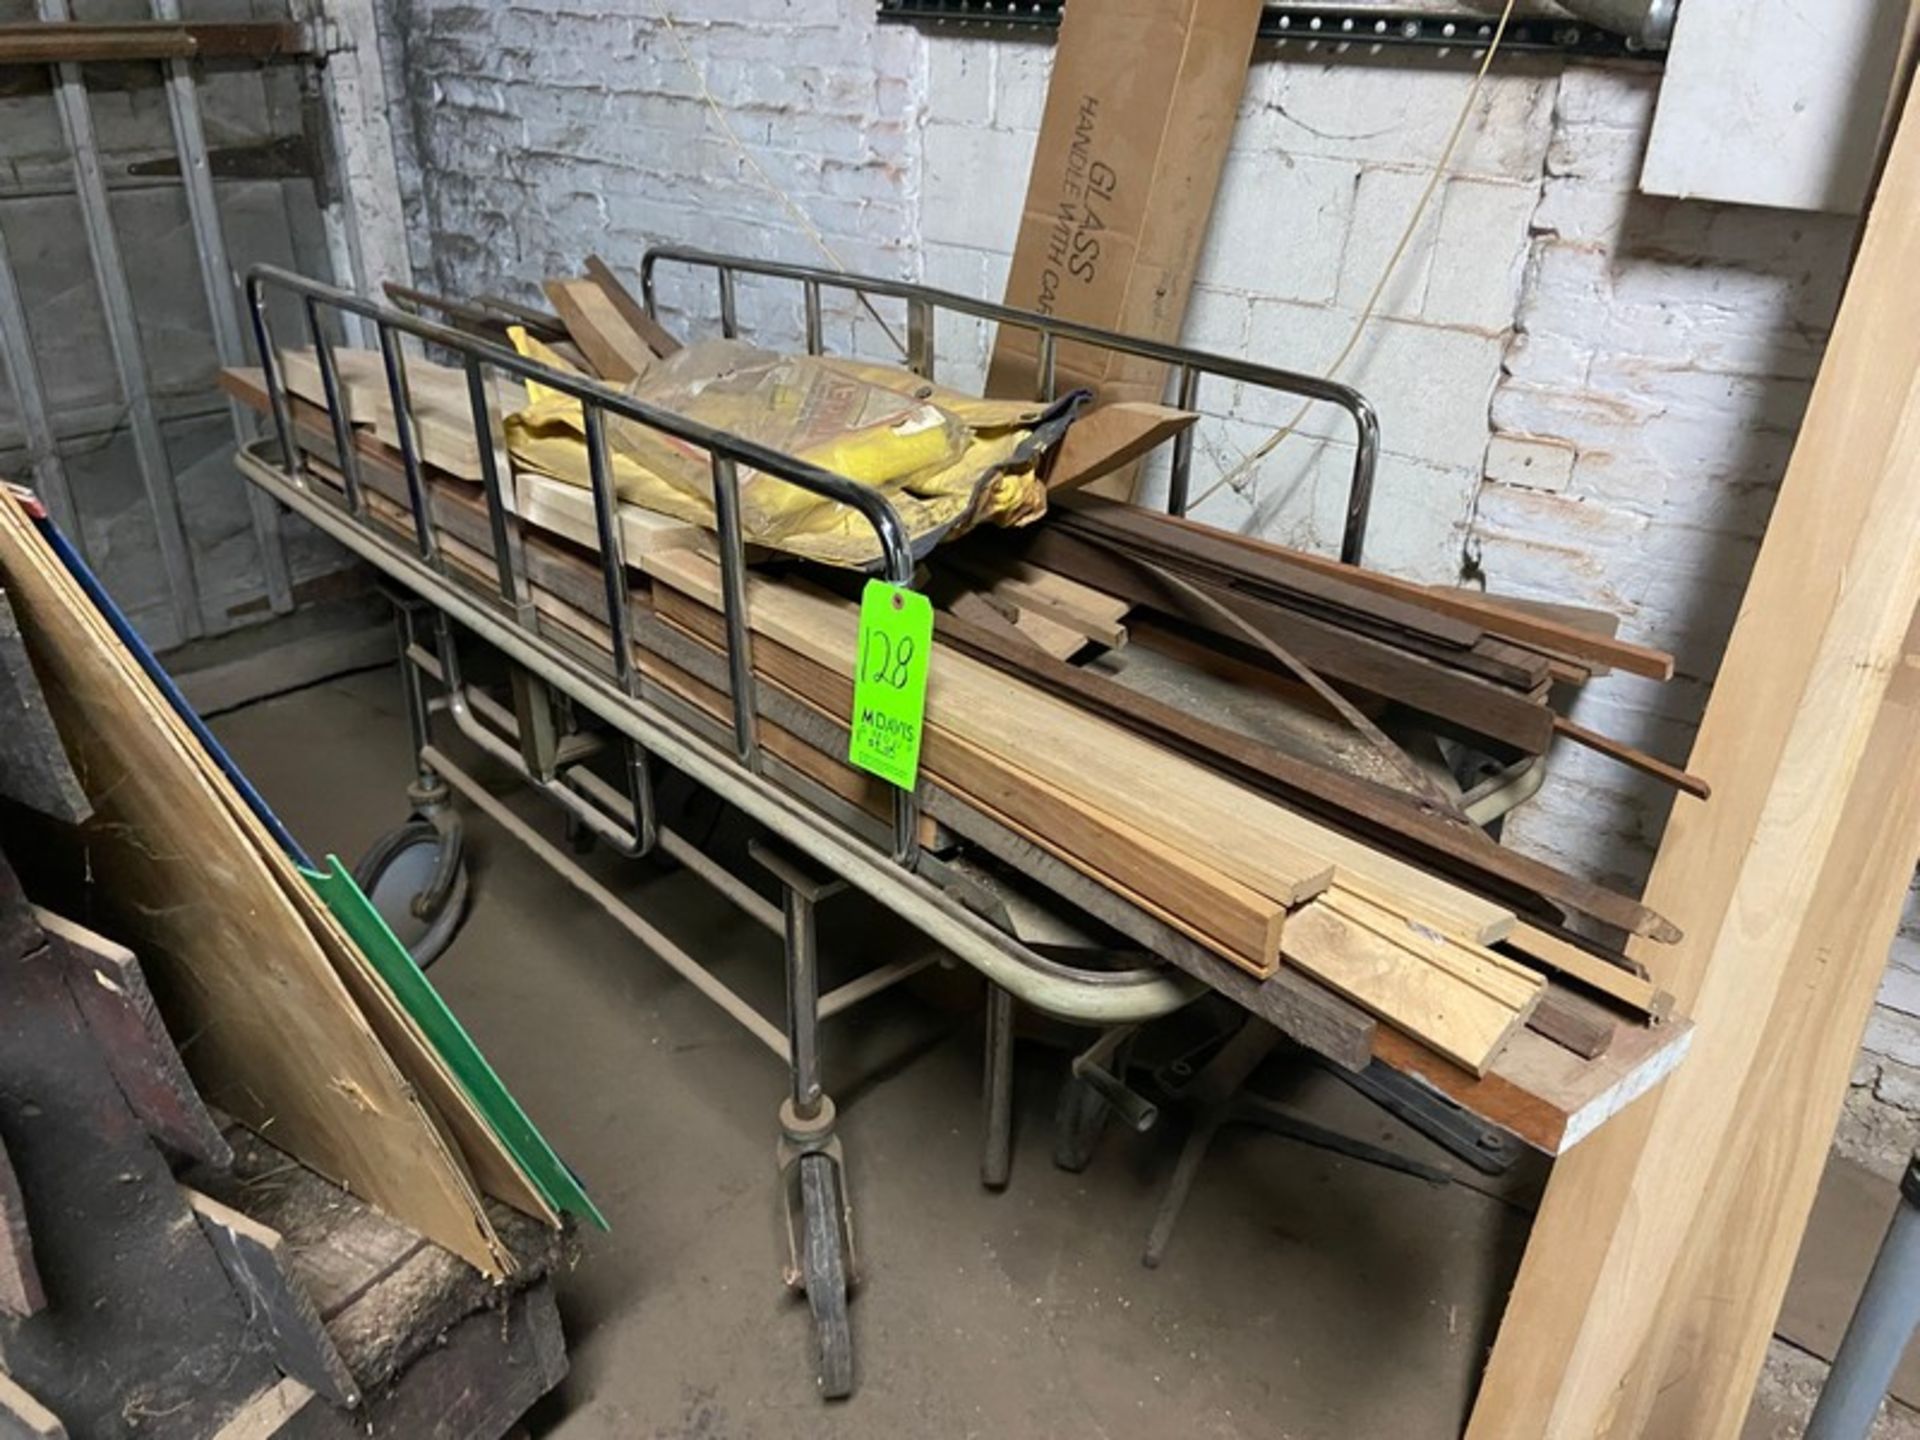 Gurney with Wooden A-Frame Rack (Both Lots Do Not Include Contents) (LOCATED IN PITTSBURGH, PA)